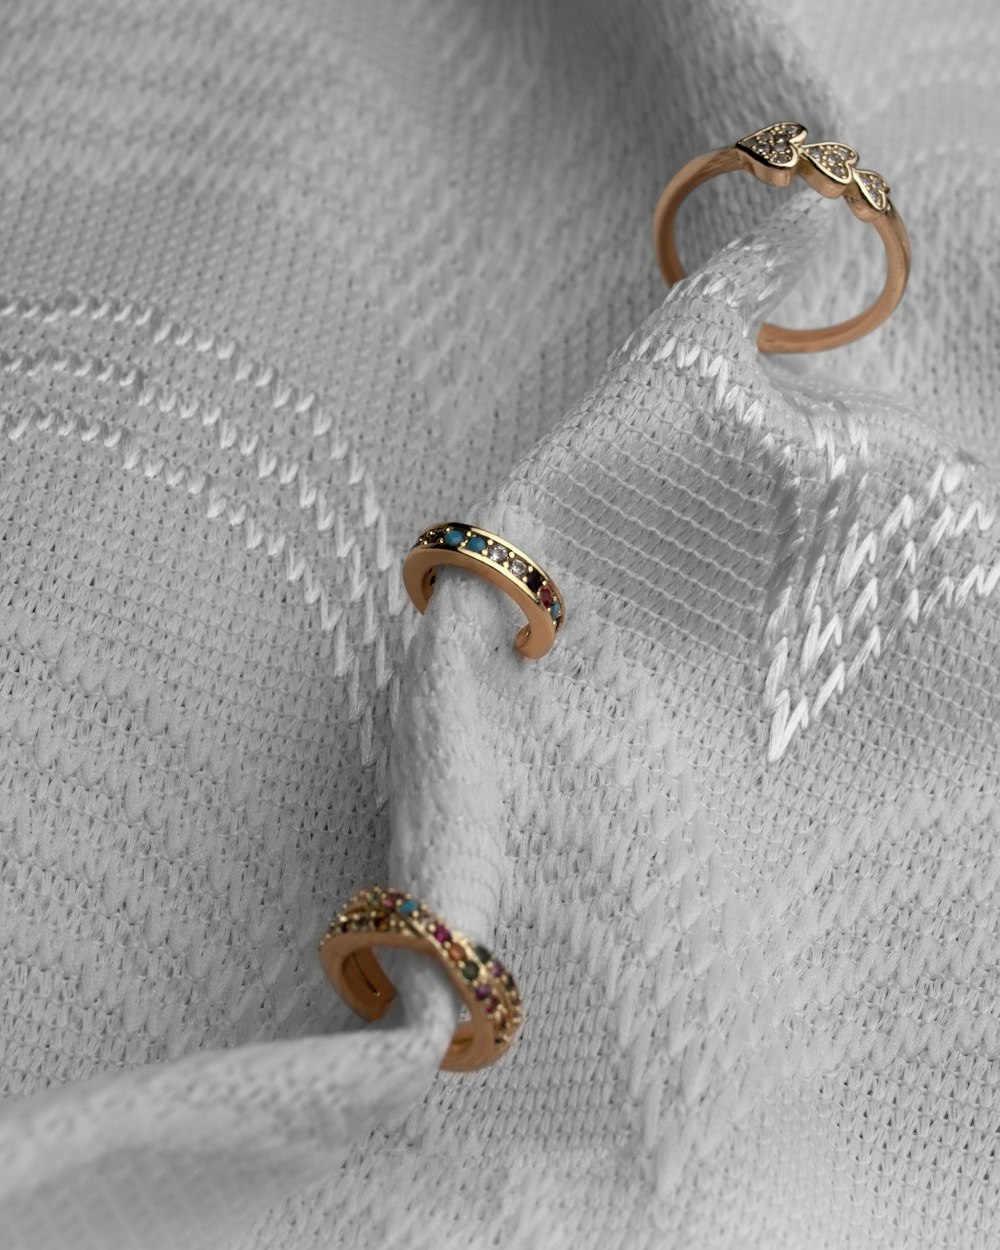 a pair of rings sitting on top of a white cloth